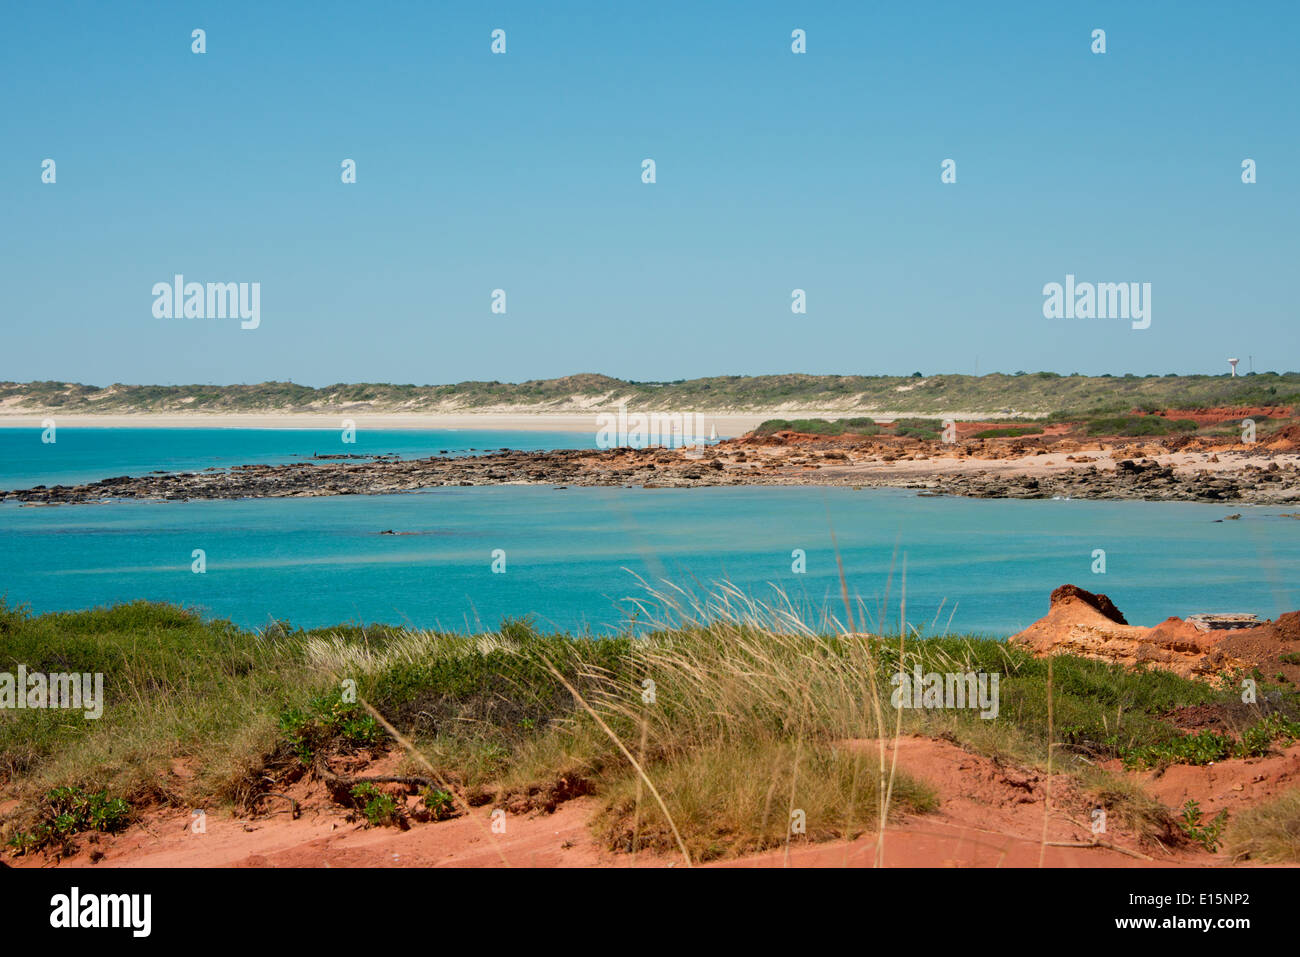 Australia, Western Australia, Broome. Gantheaume Point. View of Cable Beach from the red cliffs of Gantheaume Point. Stock Photo